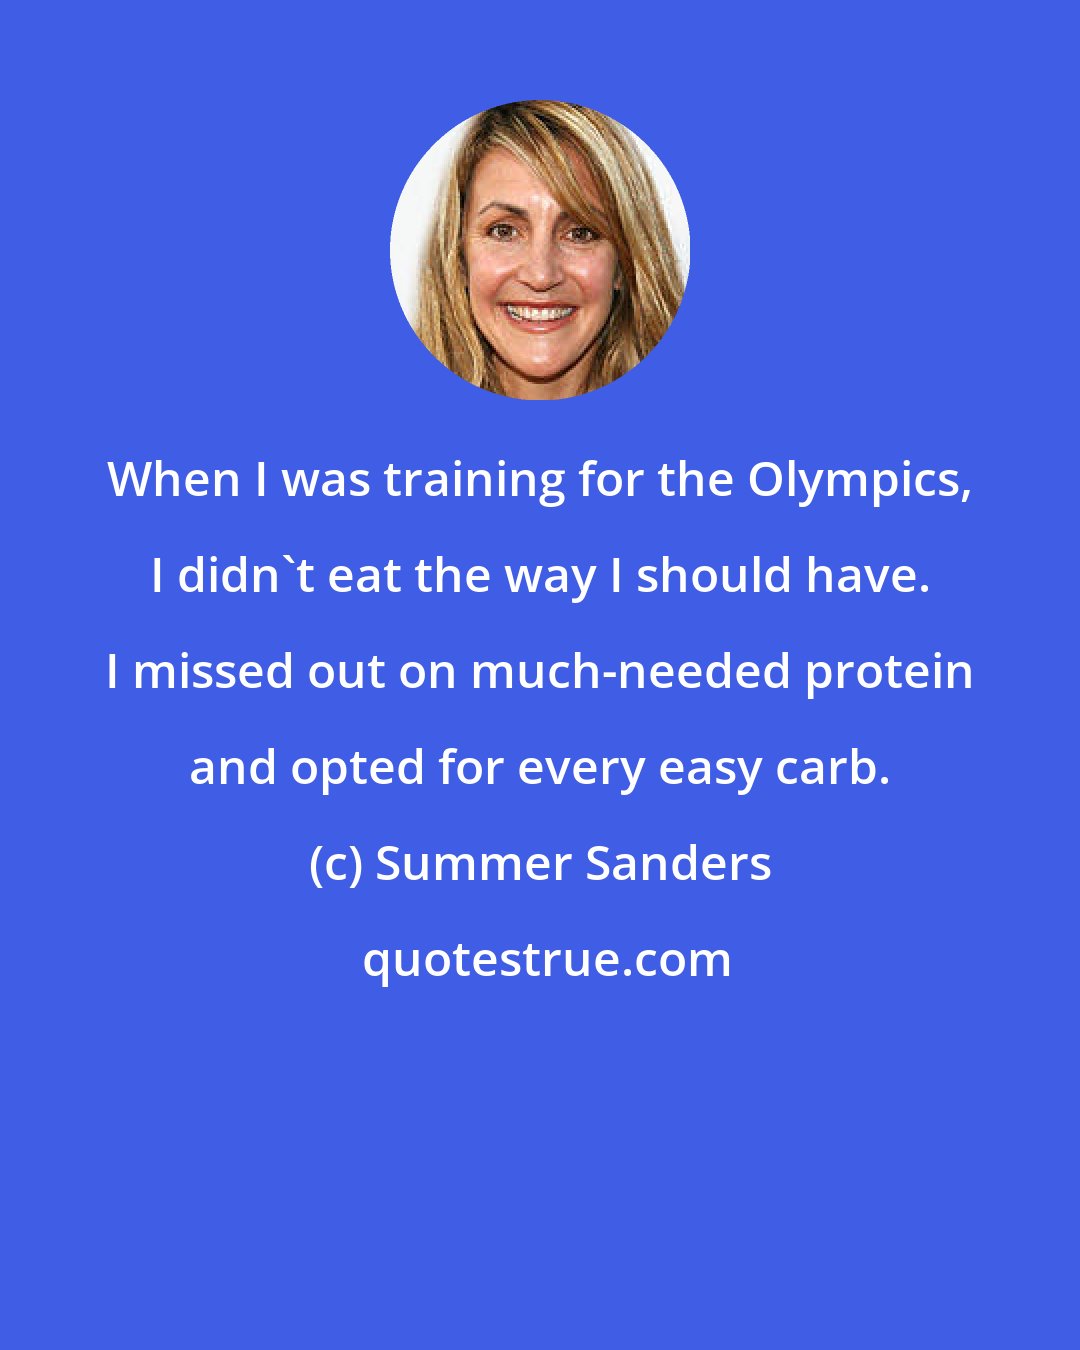 Summer Sanders: When I was training for the Olympics, I didn't eat the way I should have. I missed out on much-needed protein and opted for every easy carb.